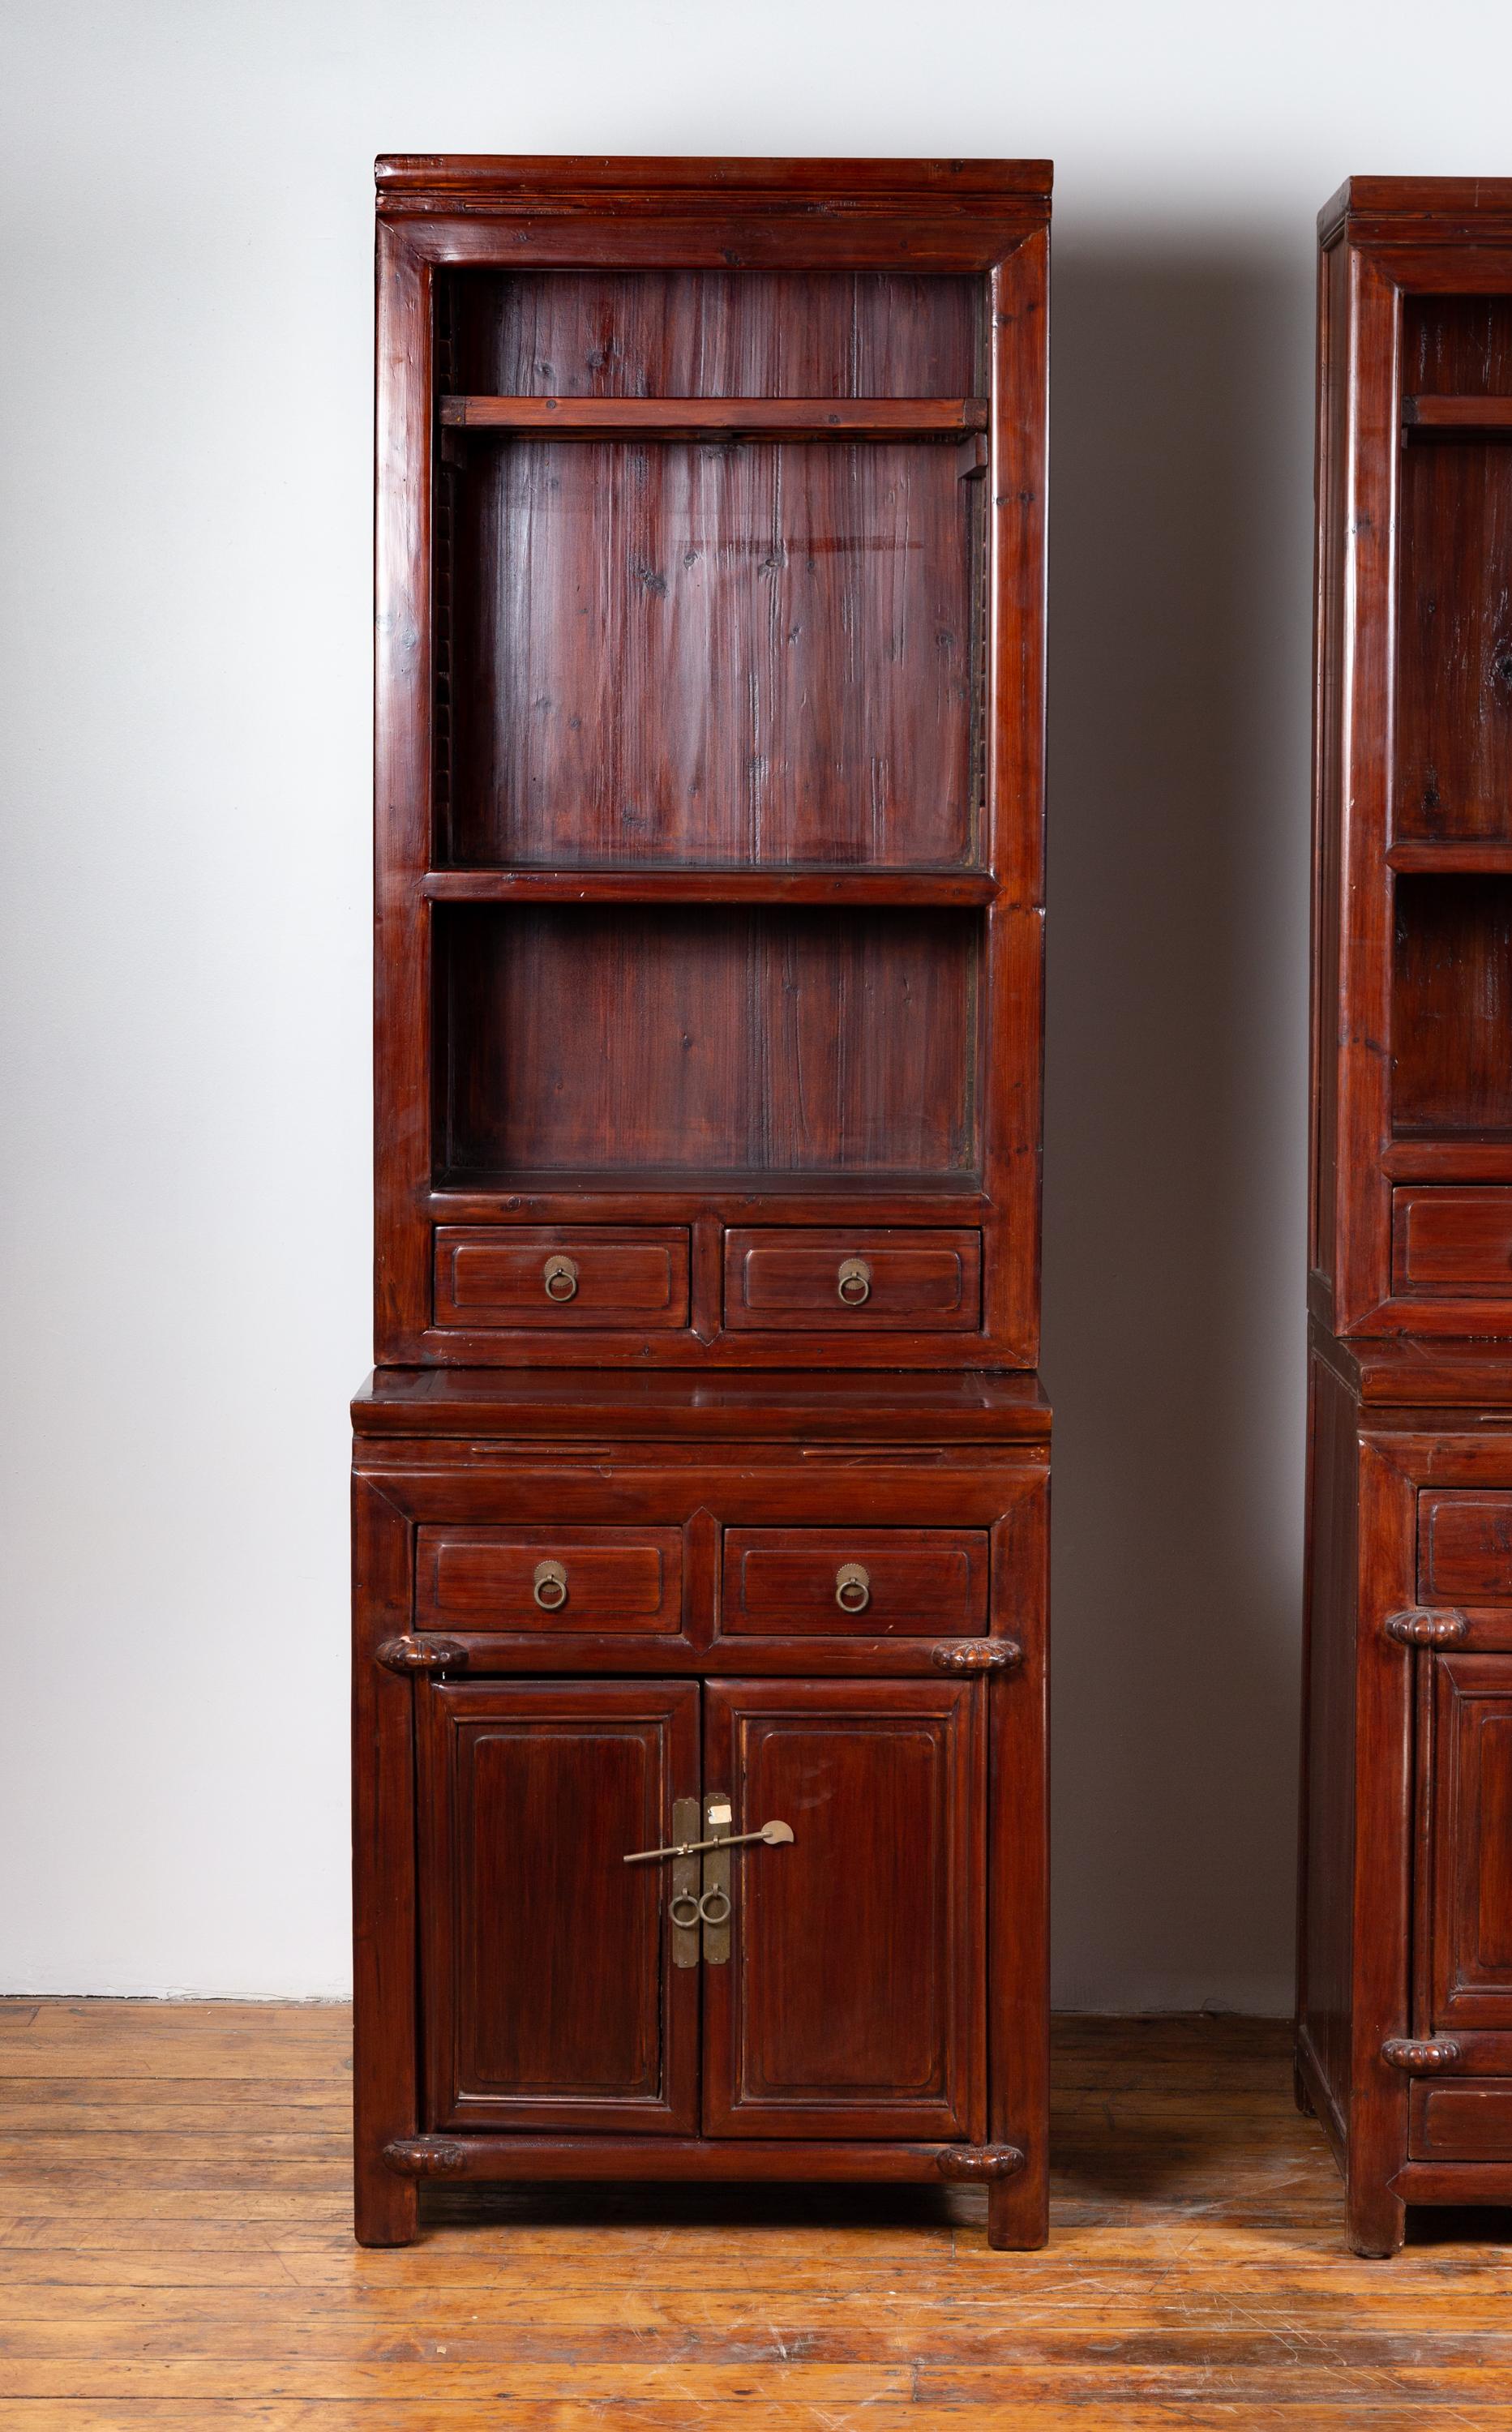 A tall Chinese antique two-part wooden lacquered cupboard from the early 20th century, with open shelves, doors and drawers, perfect to work as a pair with its twin (see item LU863916021422). Born in China during the early years of the 20th century,